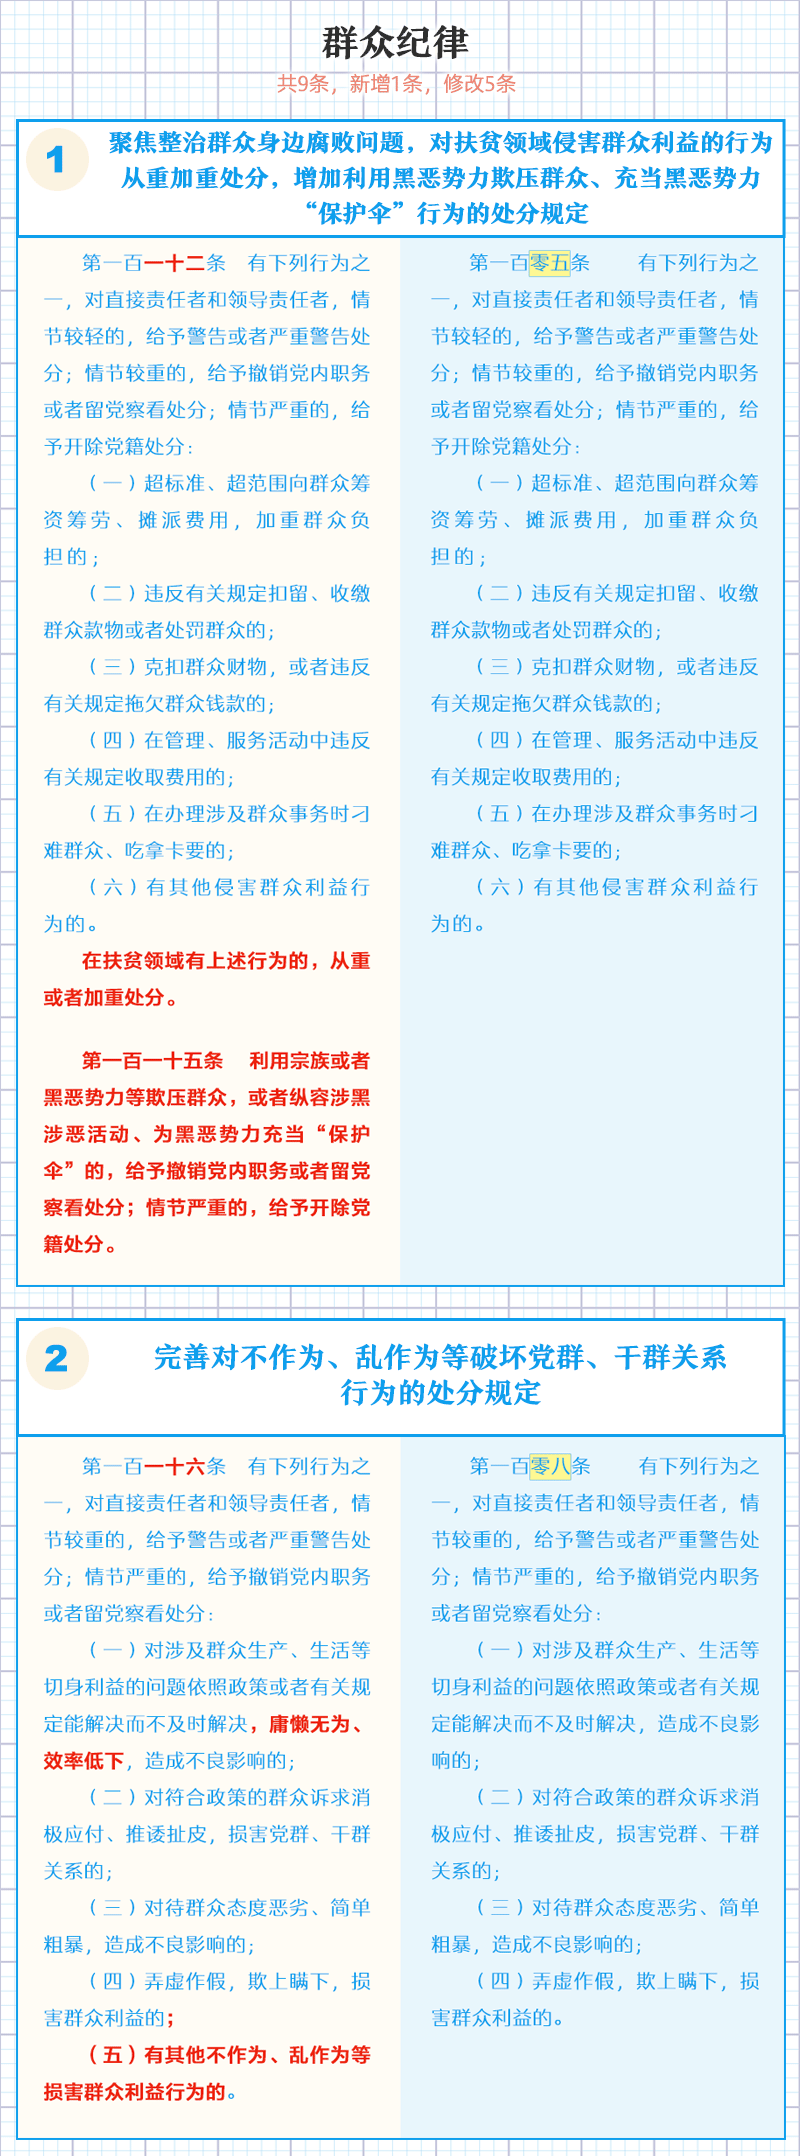 http://www.cidp.edu.cn/__local/3/D4/86/72B3D35E131F4FA9C4076DEDC9B_DF7D52AB_4661F.png?e=.png